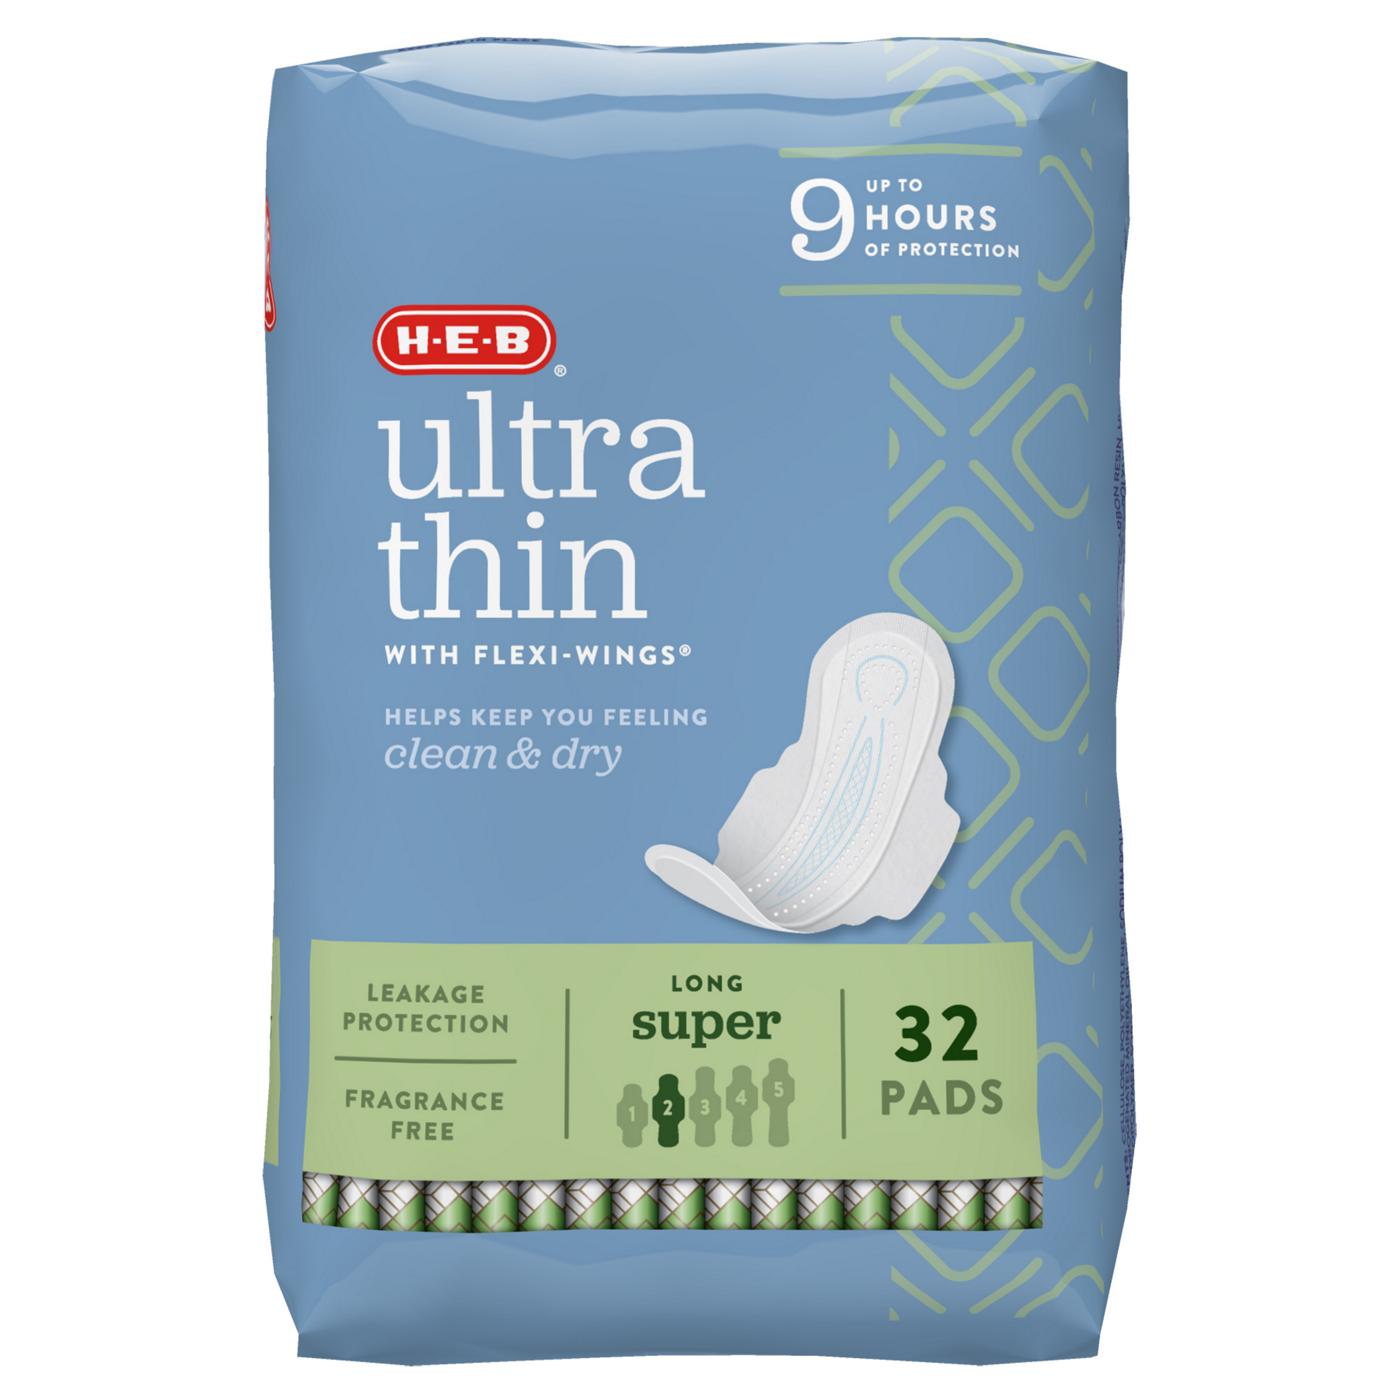 H-E-B Ultra Thin with Flexi-Wings Long Pads - Super; image 1 of 7